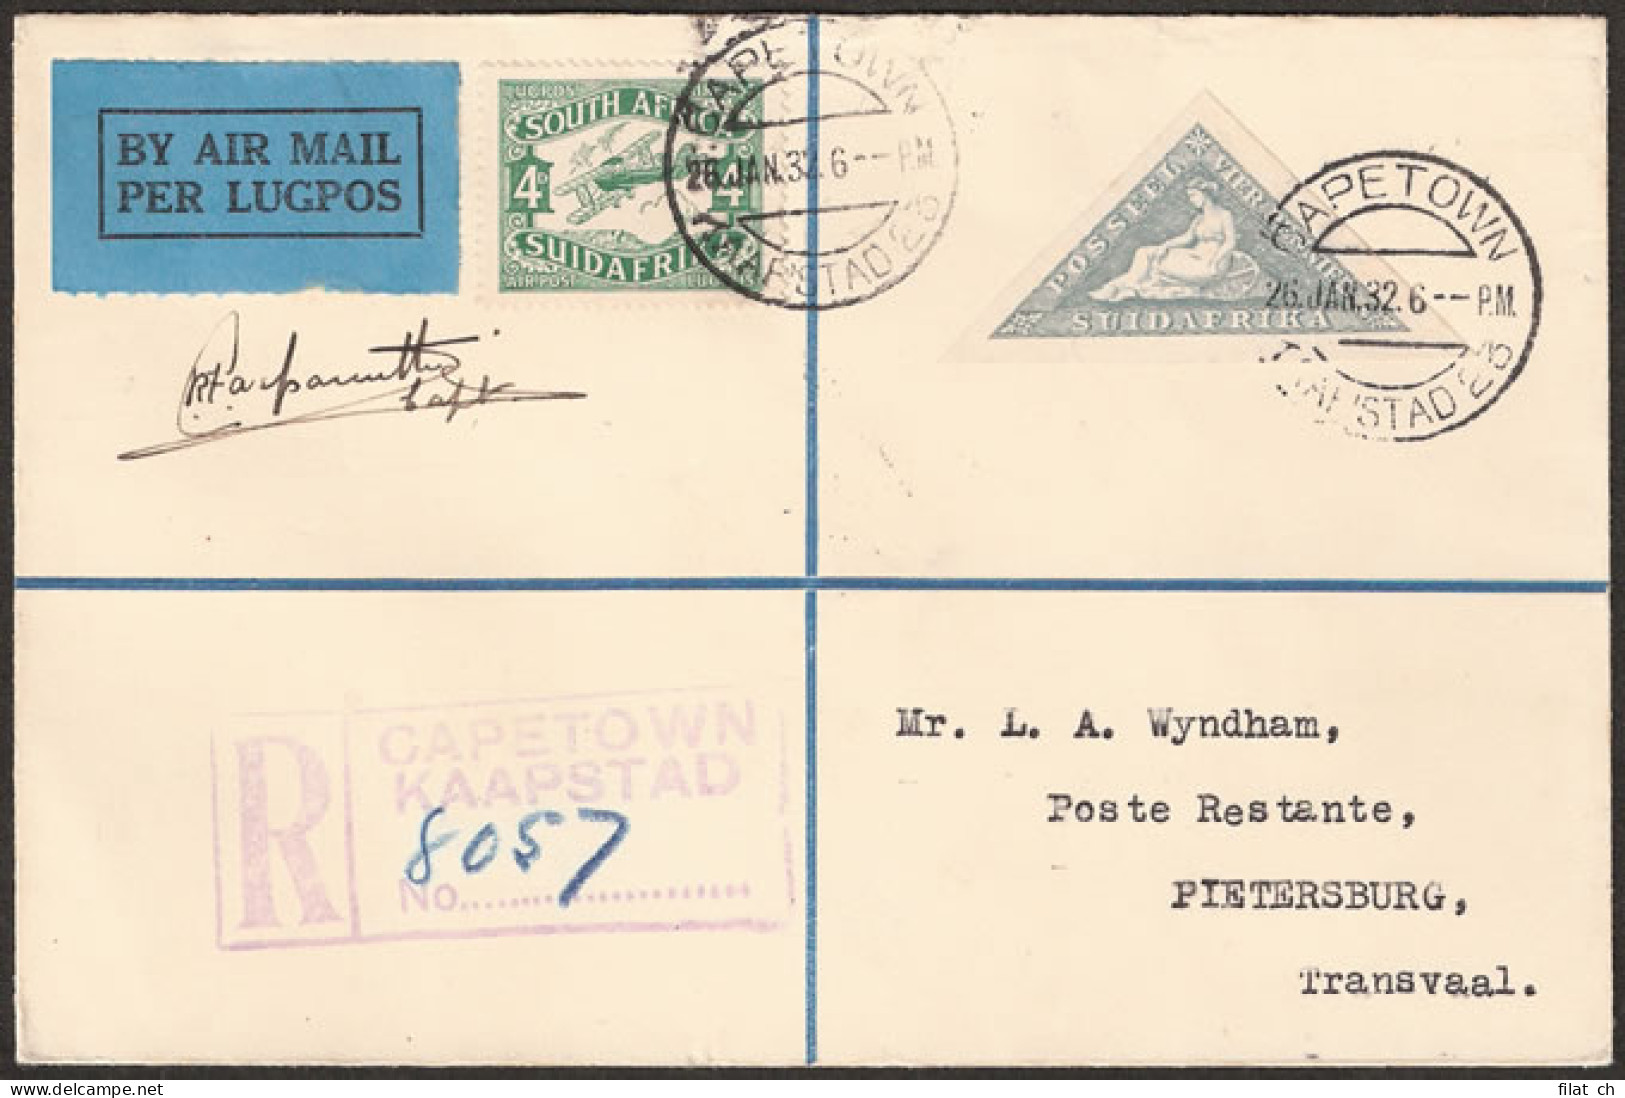 South Africa 1932 Cape Town To Pietersburg, Pilot Signed - Luftpost